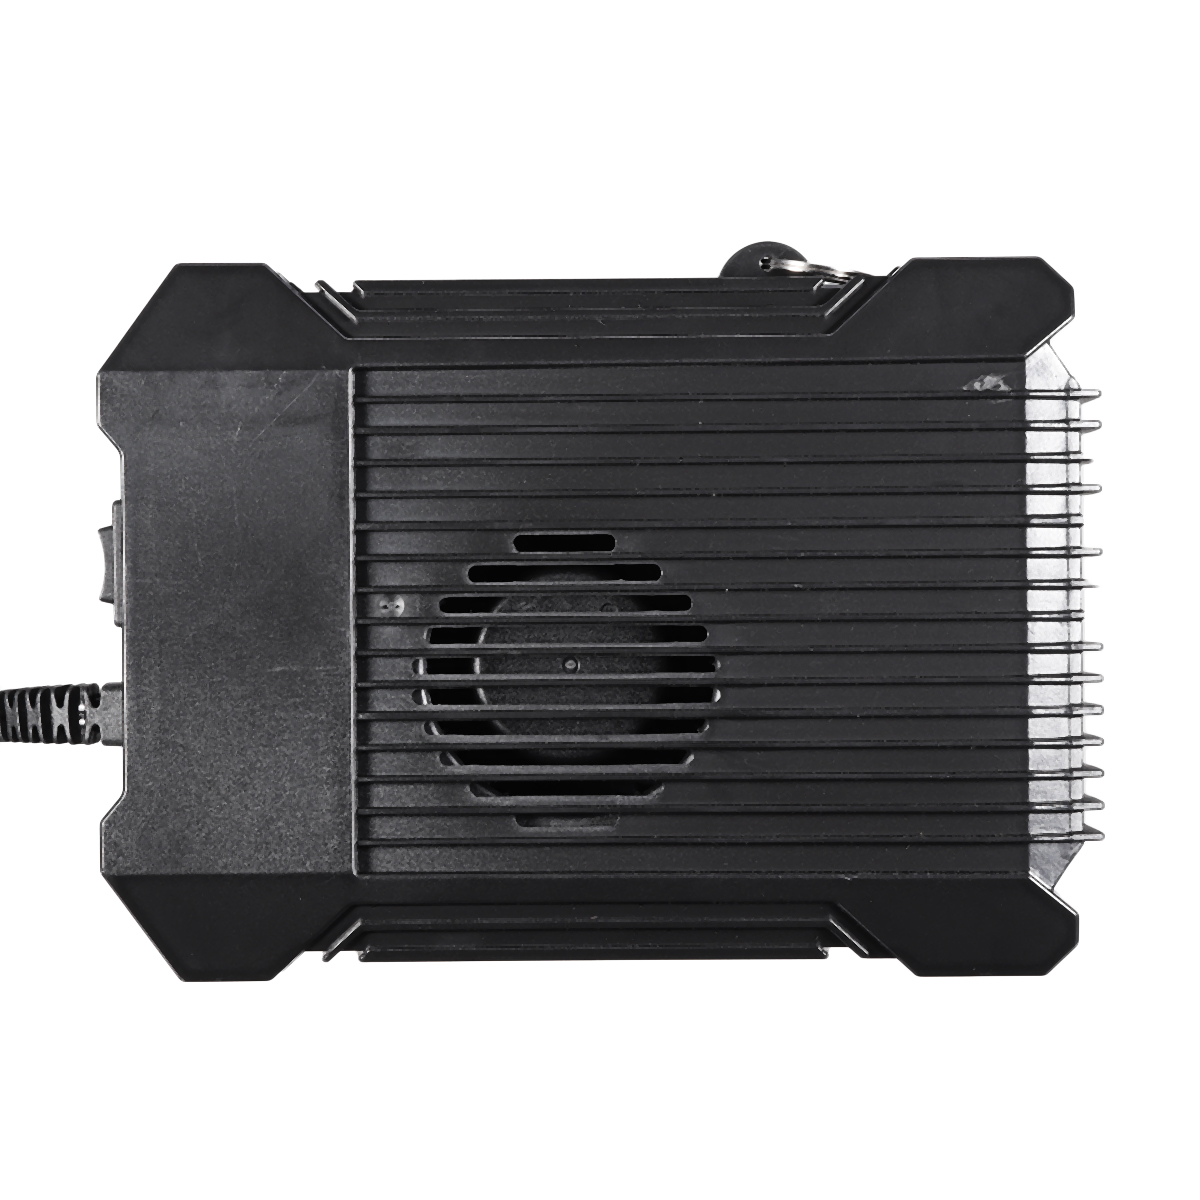 Find 2 in 1 Car Truck Heater 12V Heating Cool Fan Dryer Windscreen Demister Defroster for Sale on Gipsybee.com with cryptocurrencies